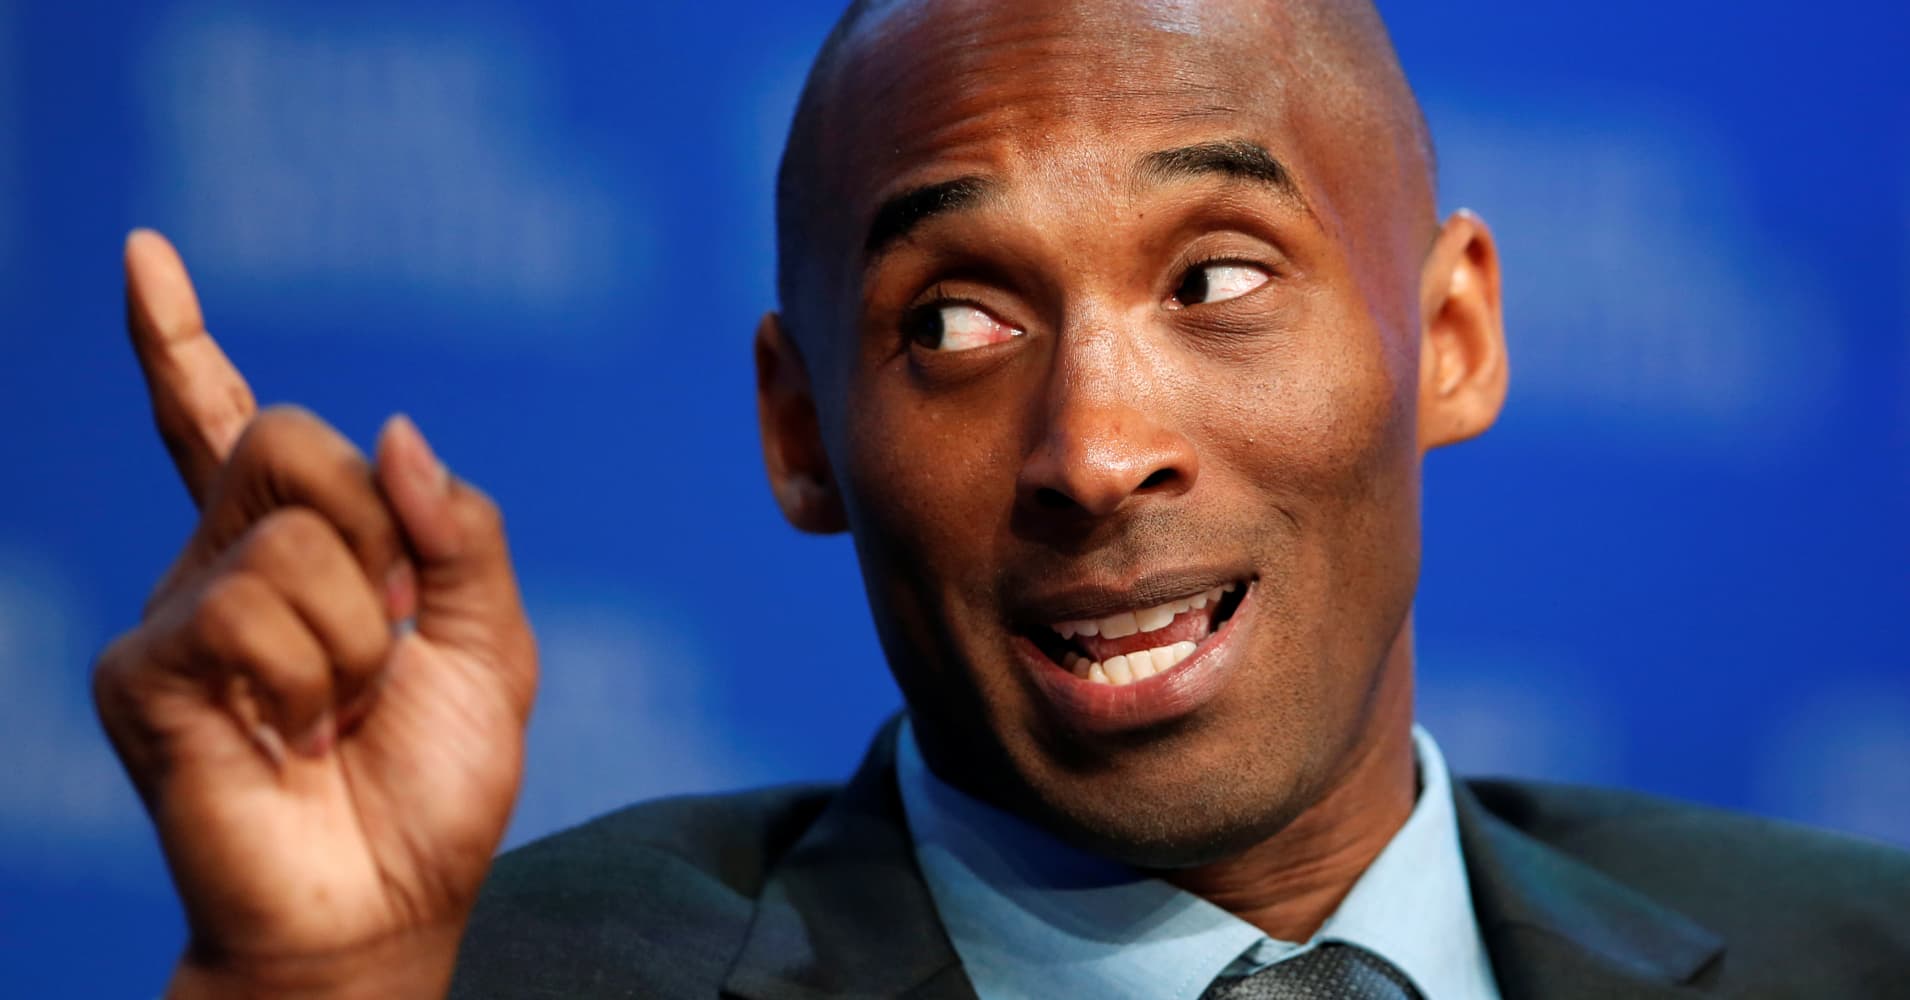 Kobe Bryant: Here's what pro athletes should do after retiring1910 x 1000